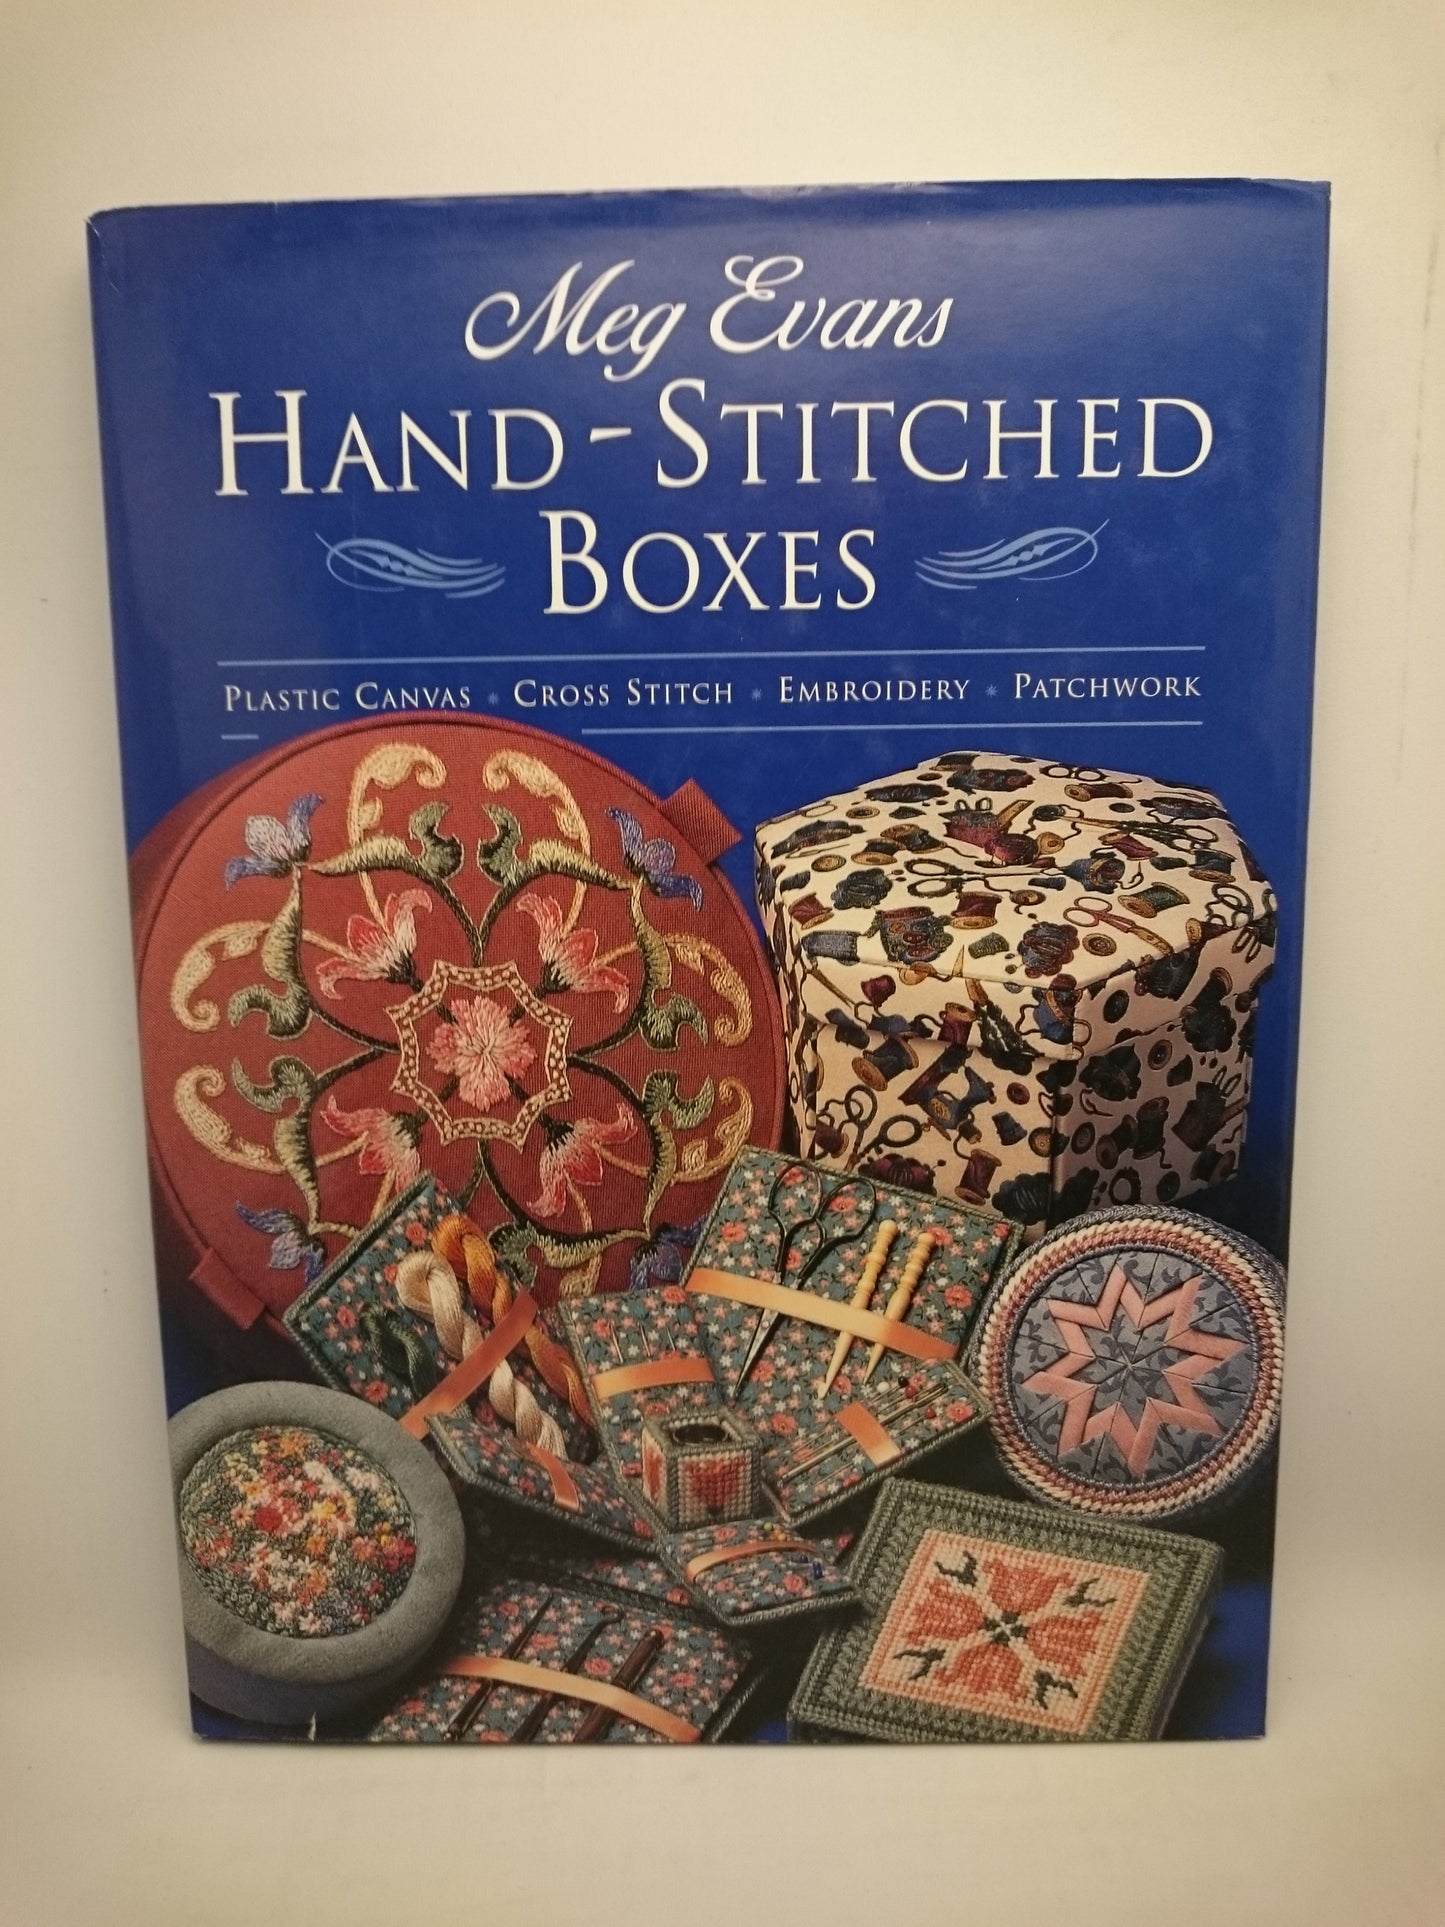 Hand-stitched Boxes